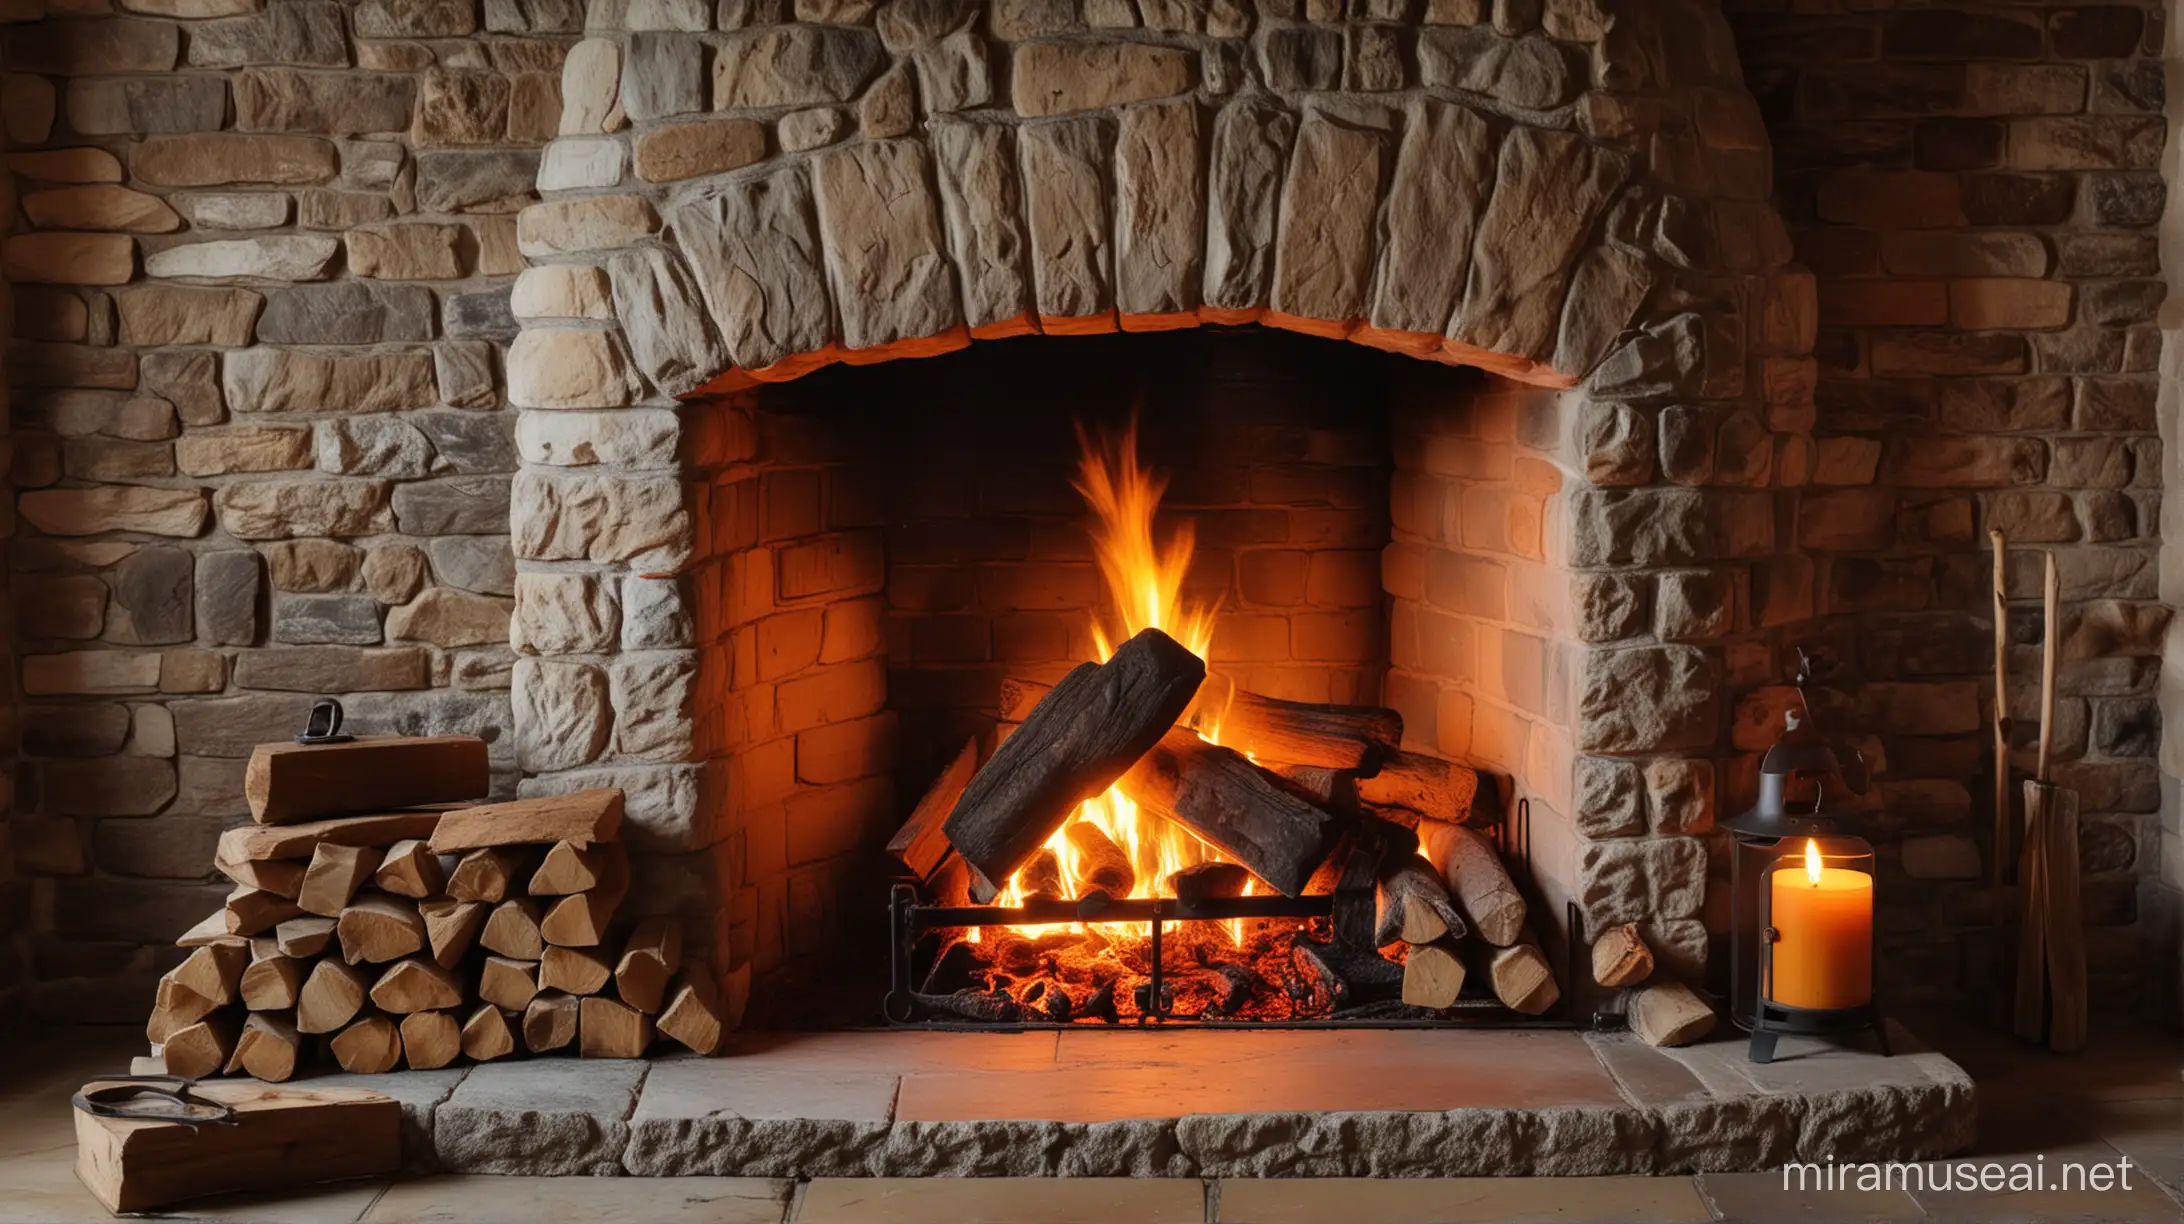 Classic Stone Fireplace with Burning Firewood